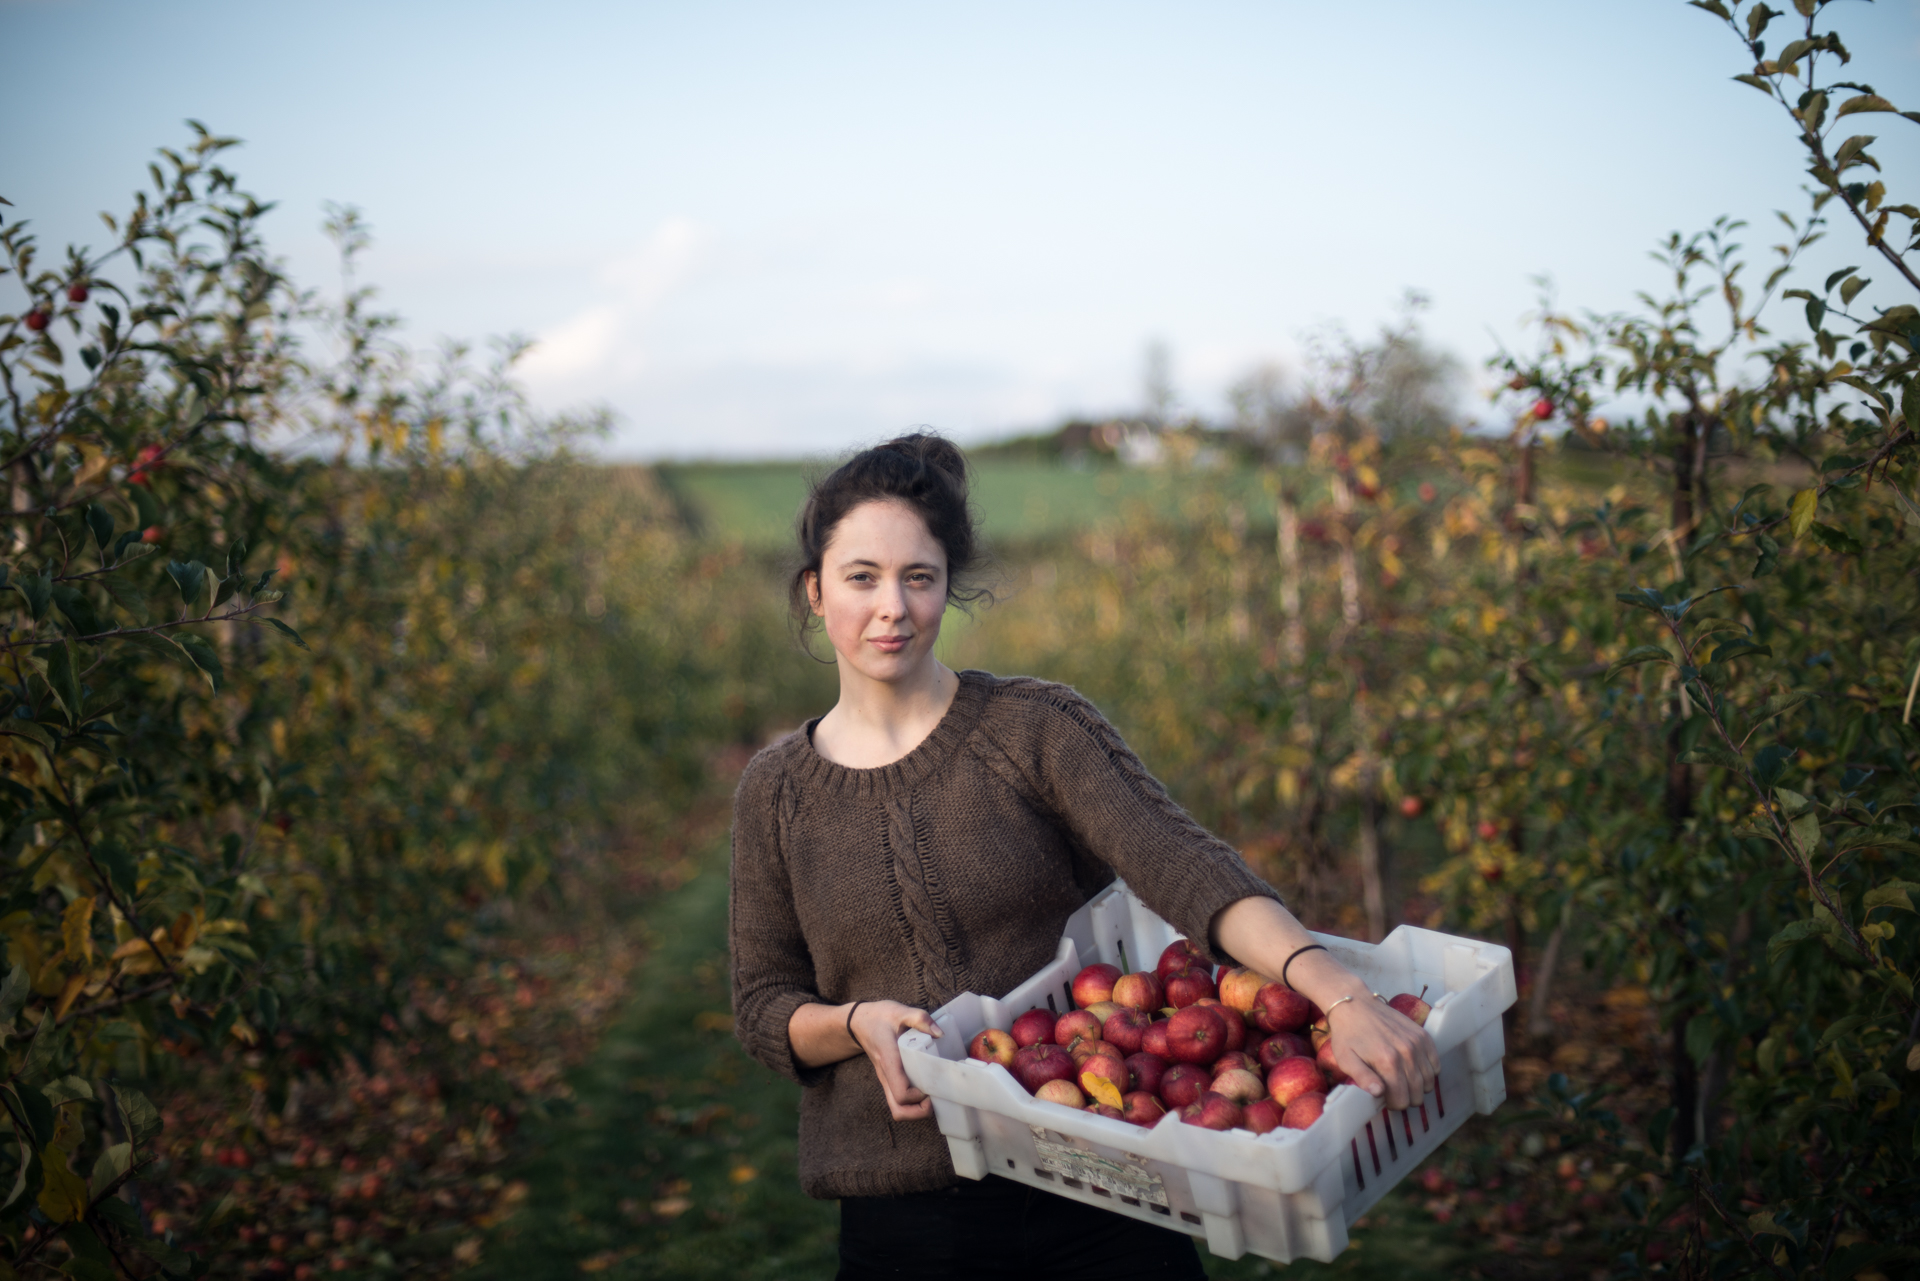 A gleaner on a farm - gathering apples that would otherwise go to waste - part of my Food Waste Warriors collection documenting food waste in the UK